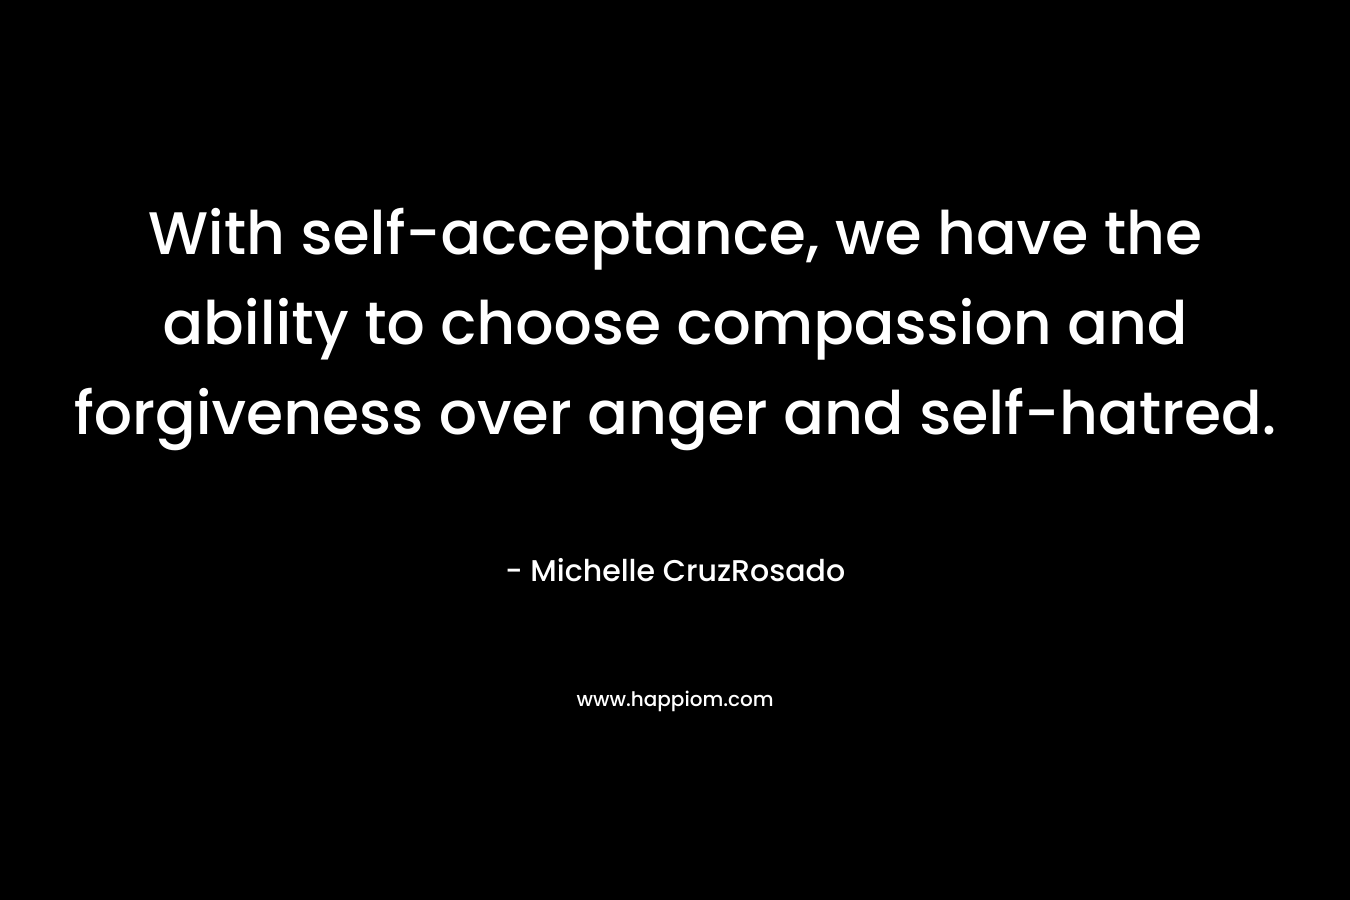 With self-acceptance, we have the ability to choose compassion and forgiveness over anger and self-hatred.